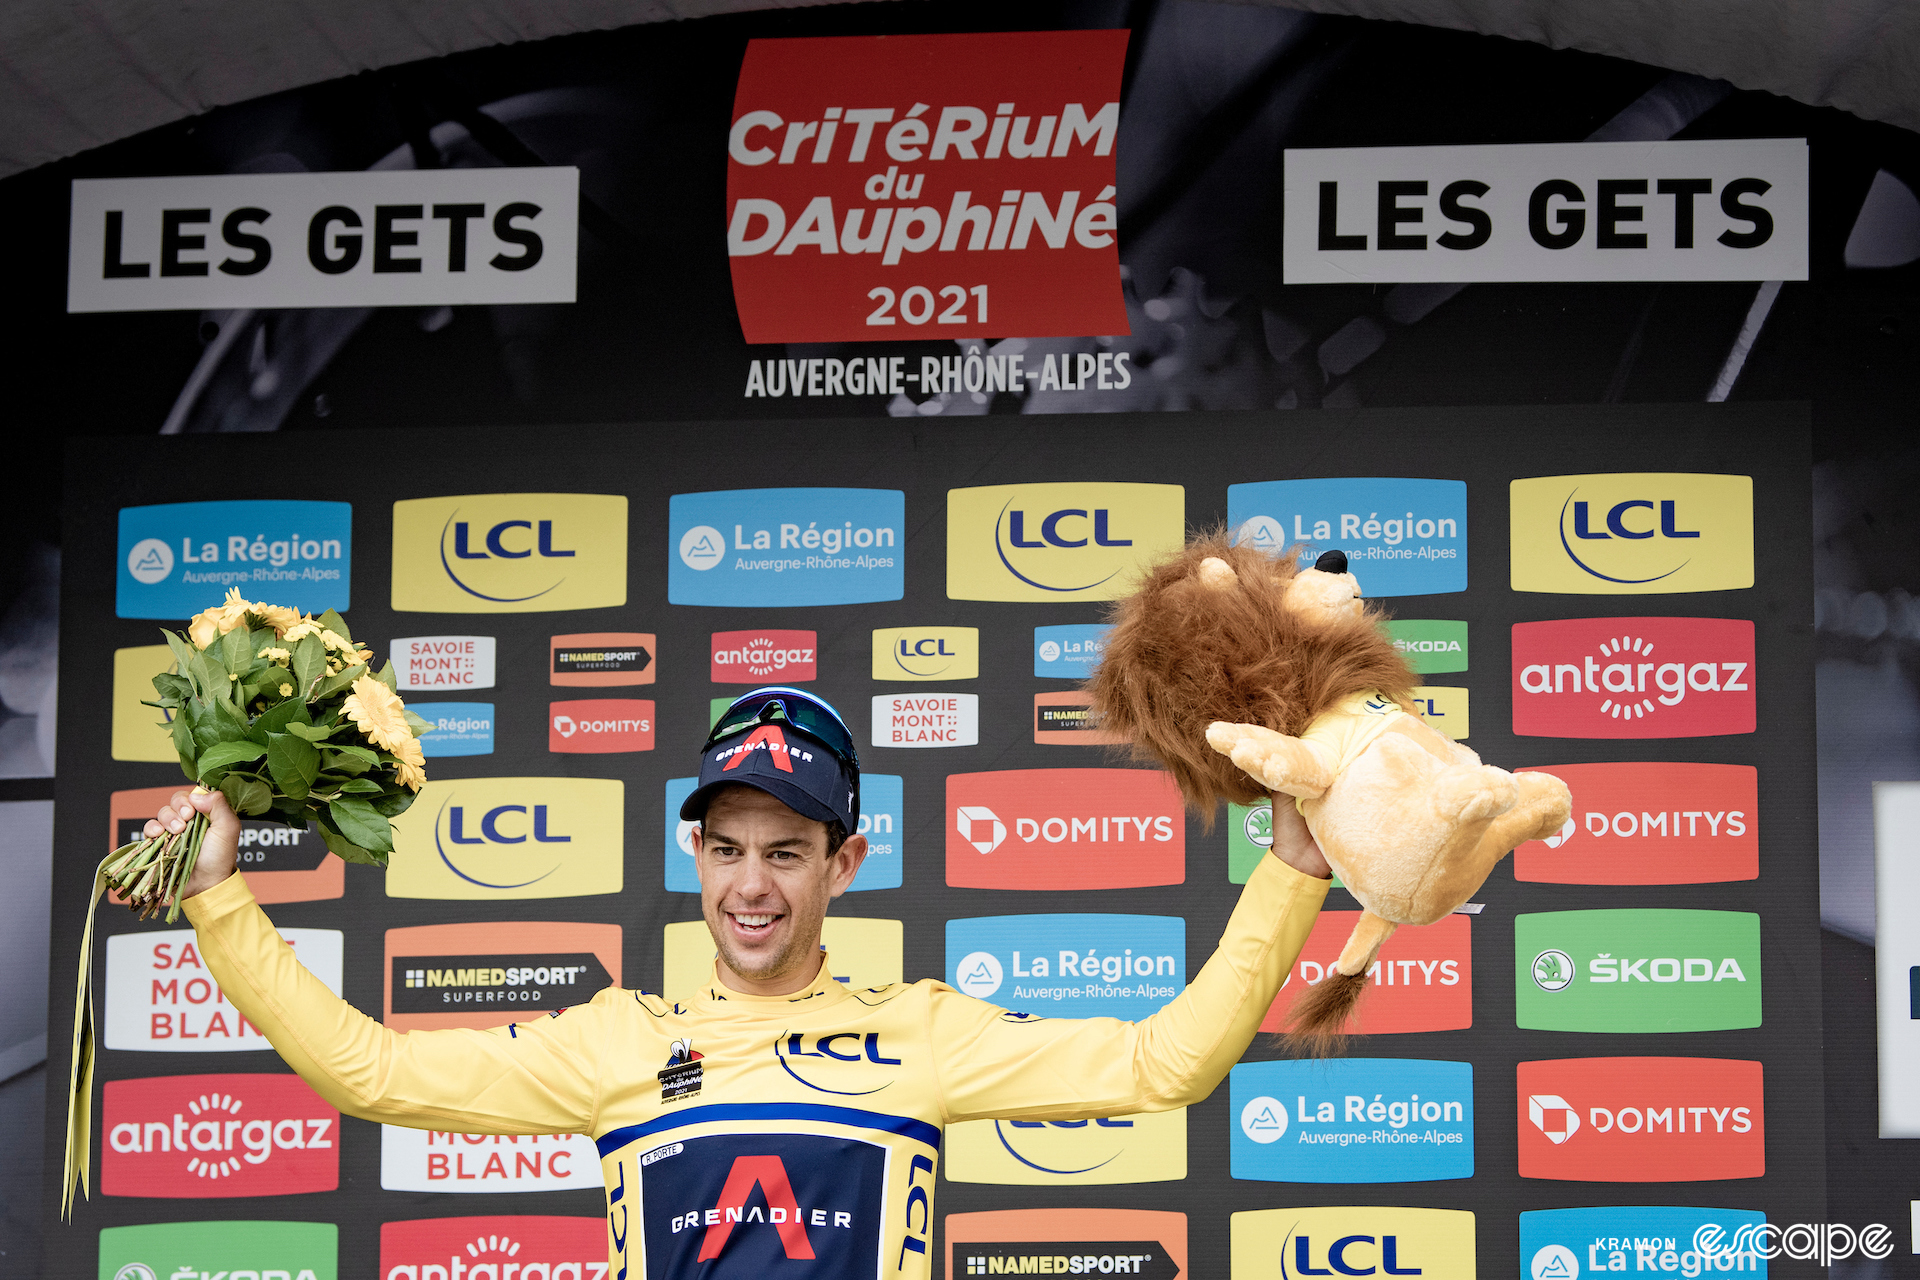 Professional cyclist Richie Porte stands on the podium at the 2021 Critérium du Dauphiné, wearing the yellow leader's jersey, holding a yellow lion in his left hand and a bunch of flowers in his right hand.